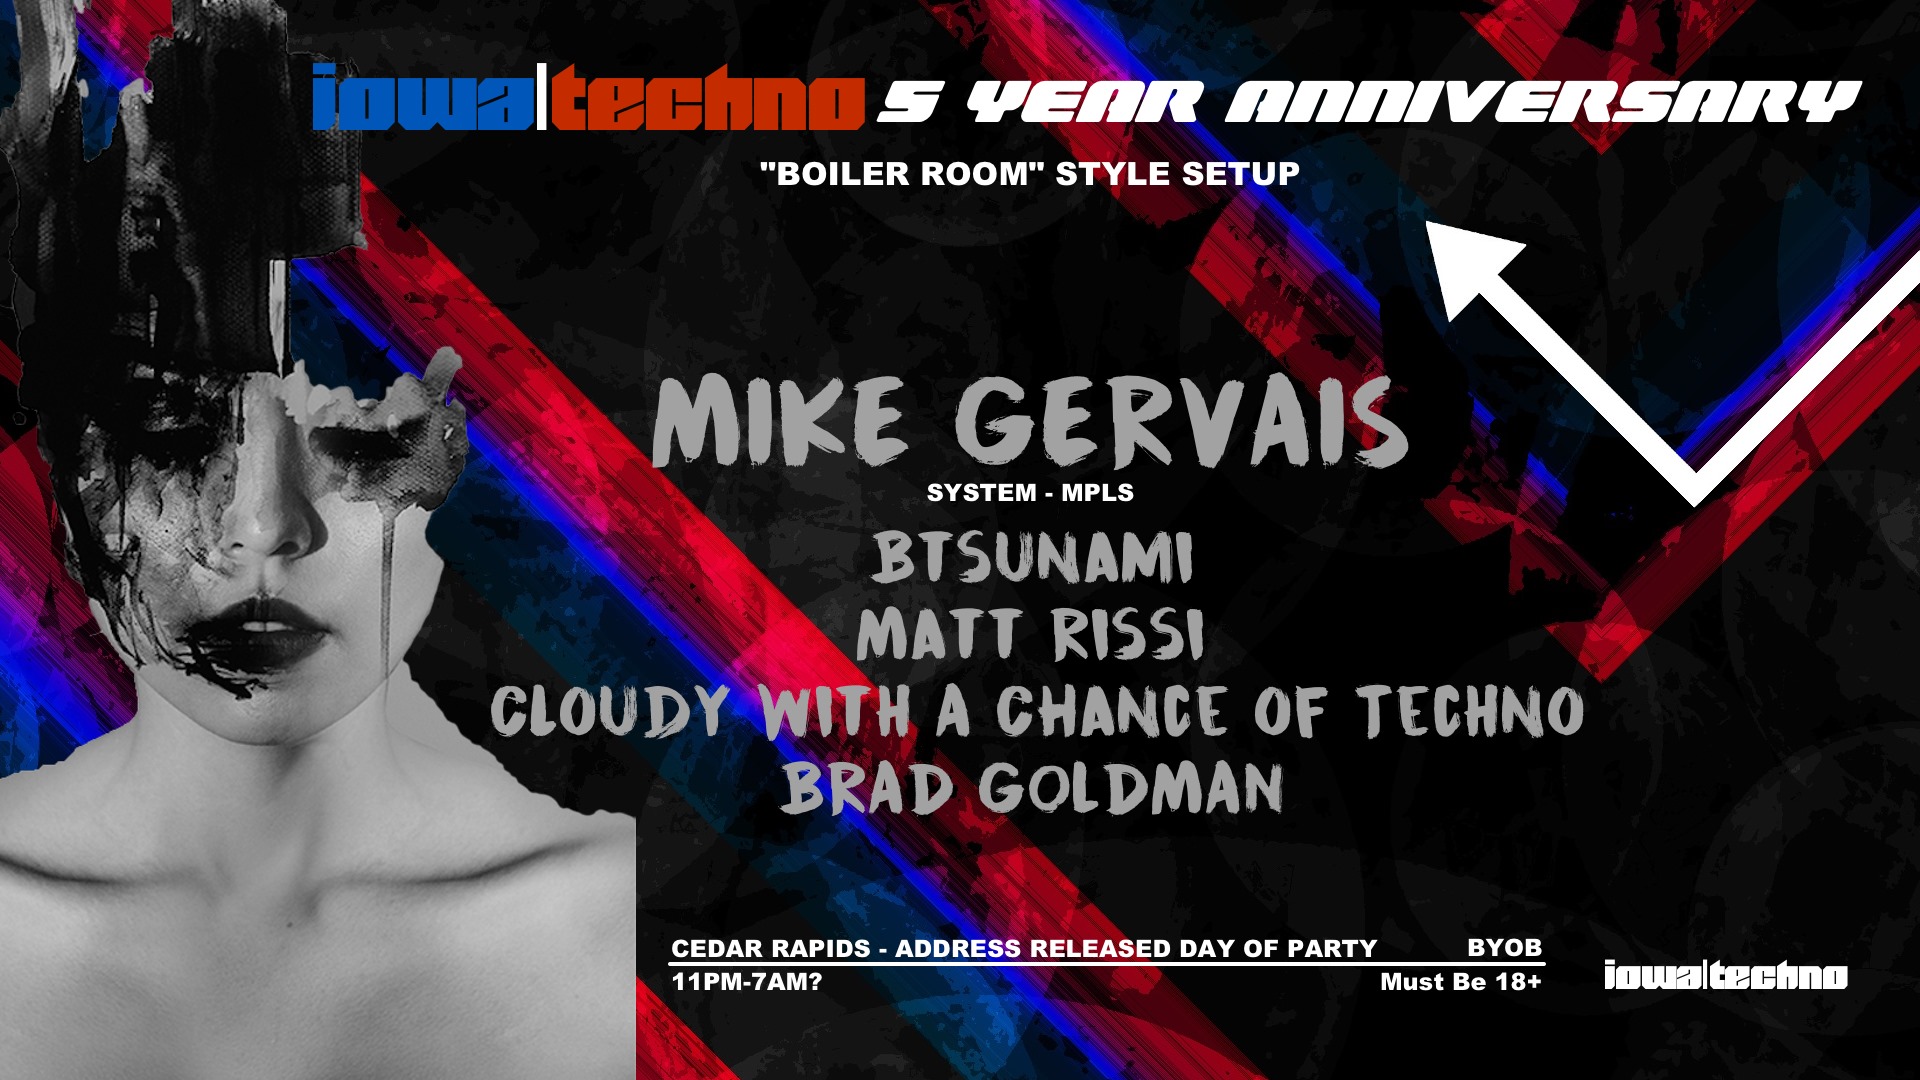 IowaTechno 5 Year Anniversary. A graphical description of the music lineup. Featuring Mike Gervais, BTsunami, Matt Rissi, Cloudy with a Chance of Techno, and Brad Goldman